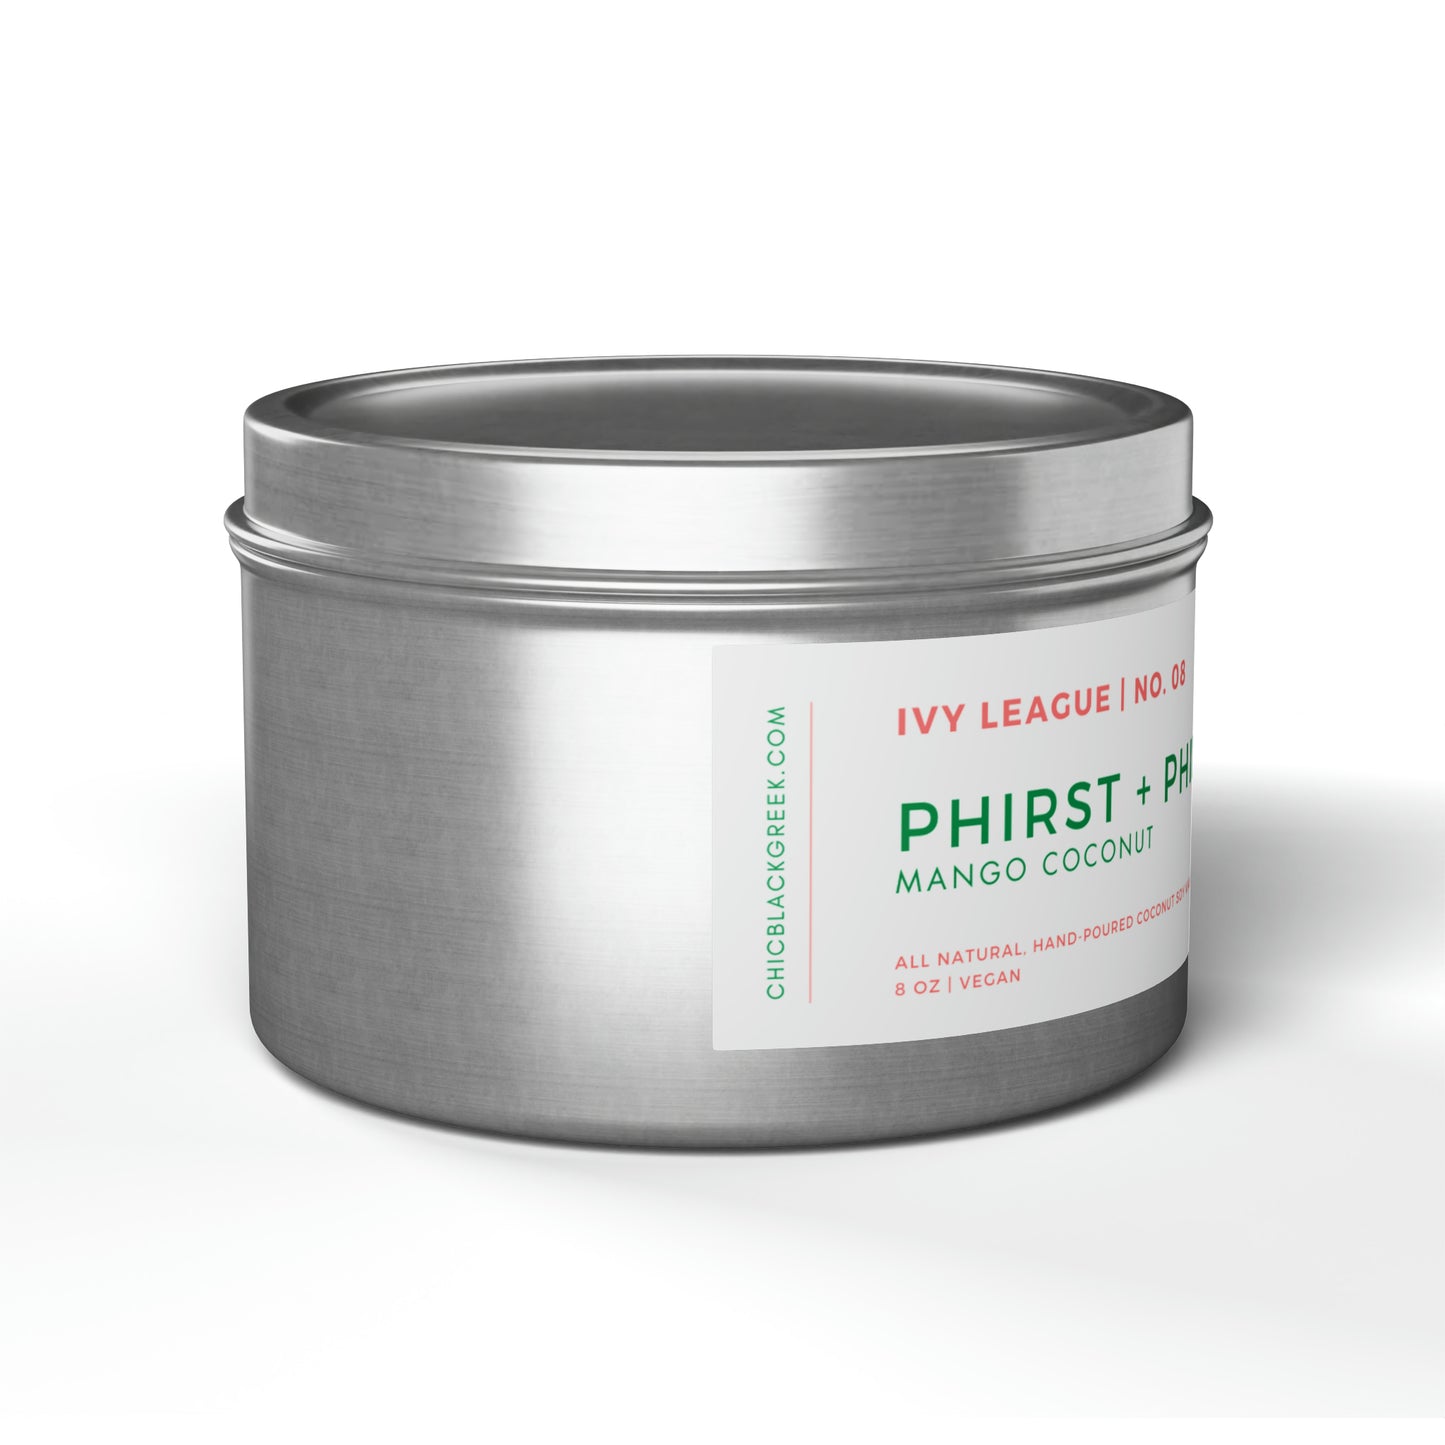 Ivy League No. 08 Phirst + Phinest Candle | Mango Coconut